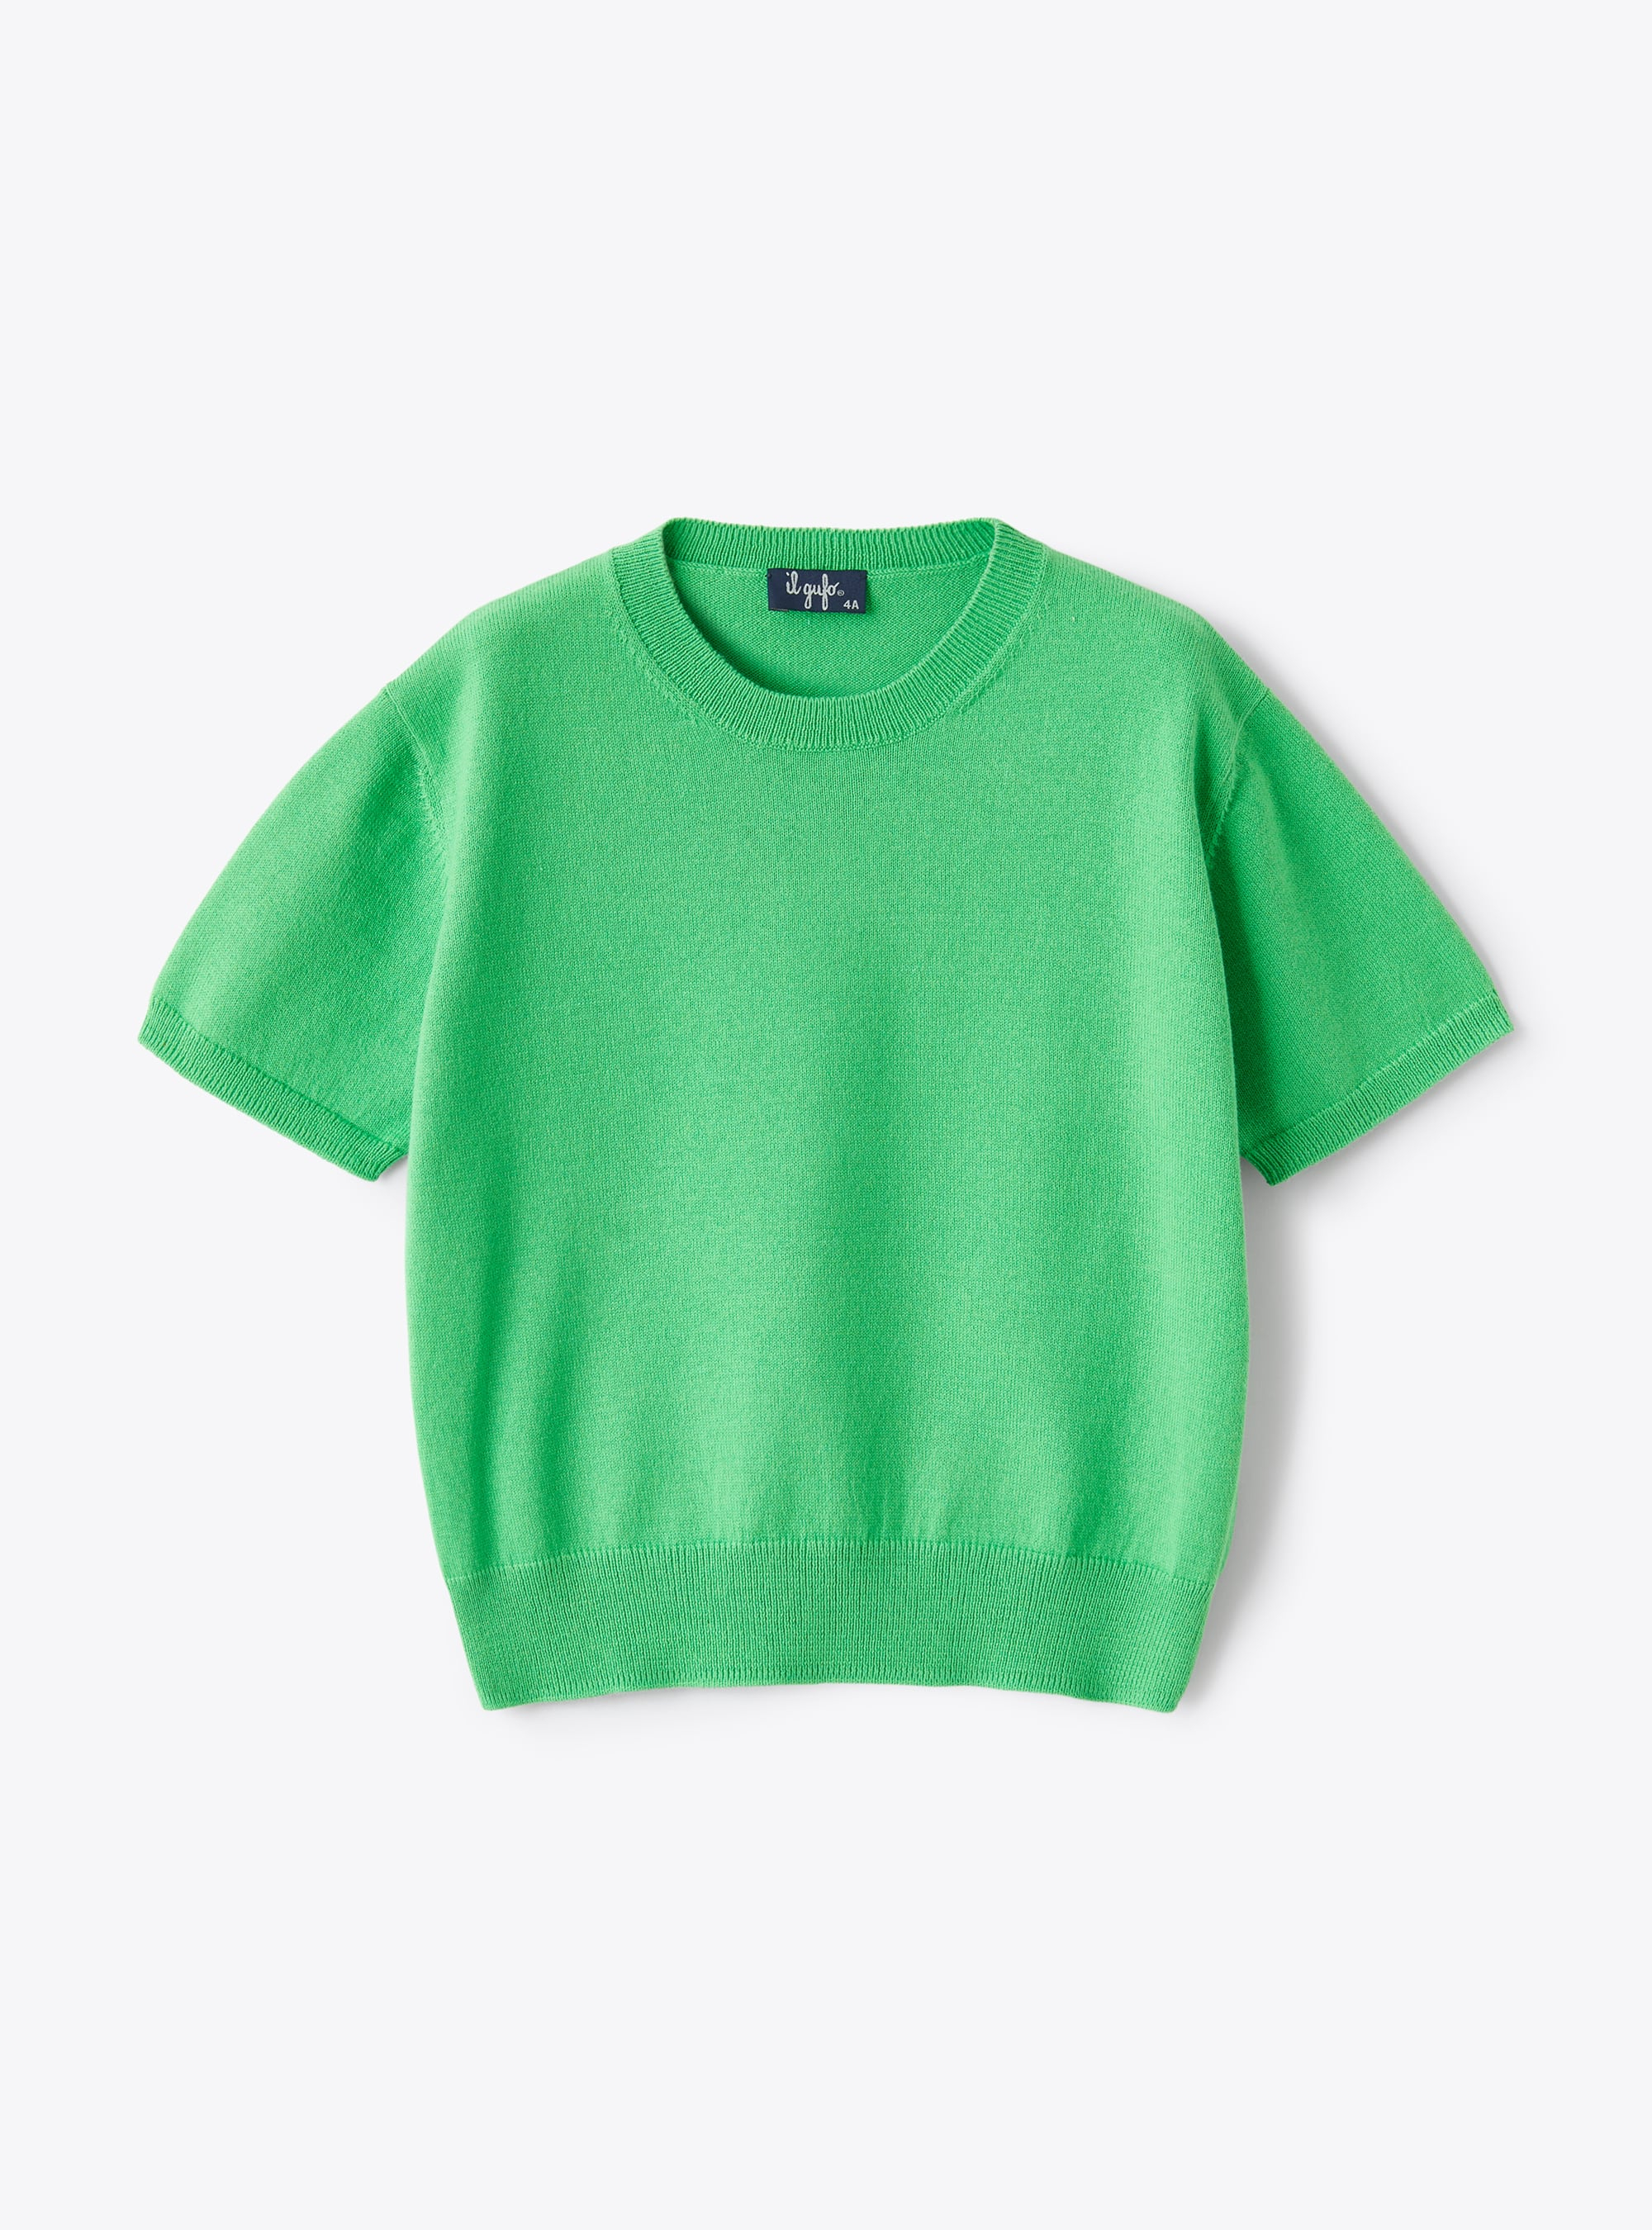 Short-sleeve unisex sweater in organic lime-green cotton - Sweaters - Il Gufo